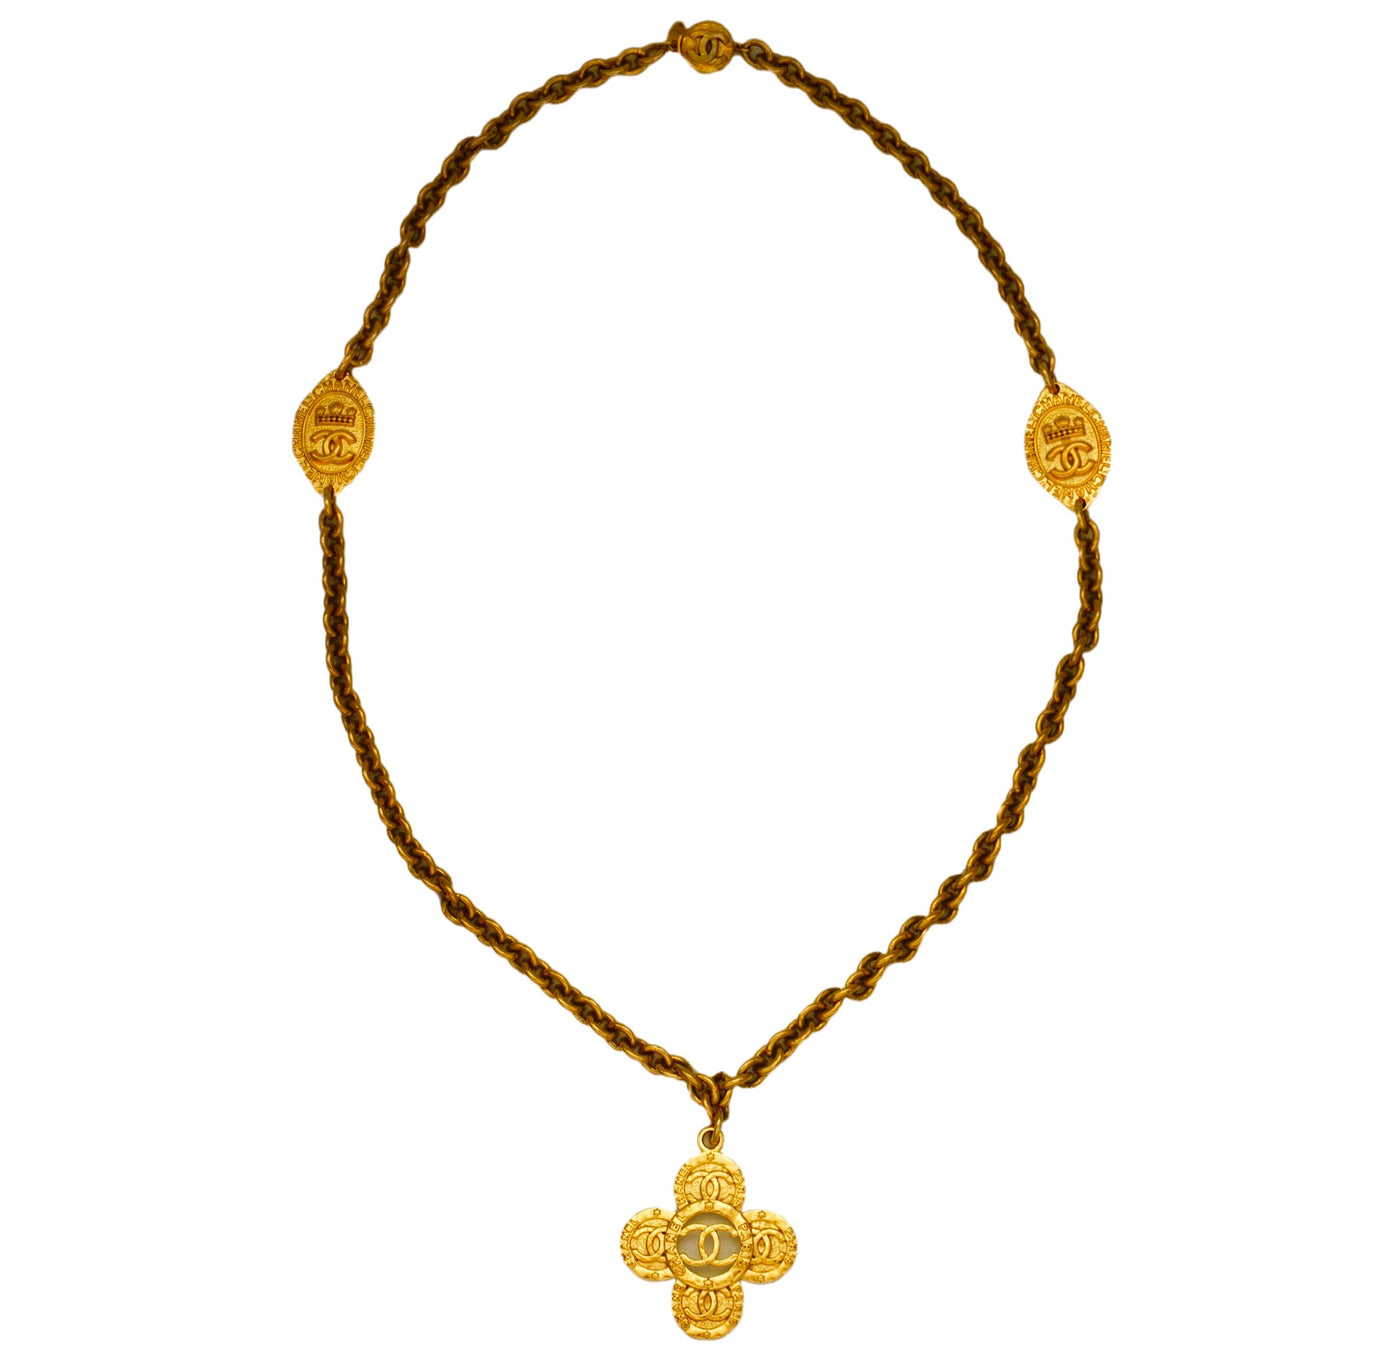 Authentic Chanel Vintage Iconic Gold Cross Necklace